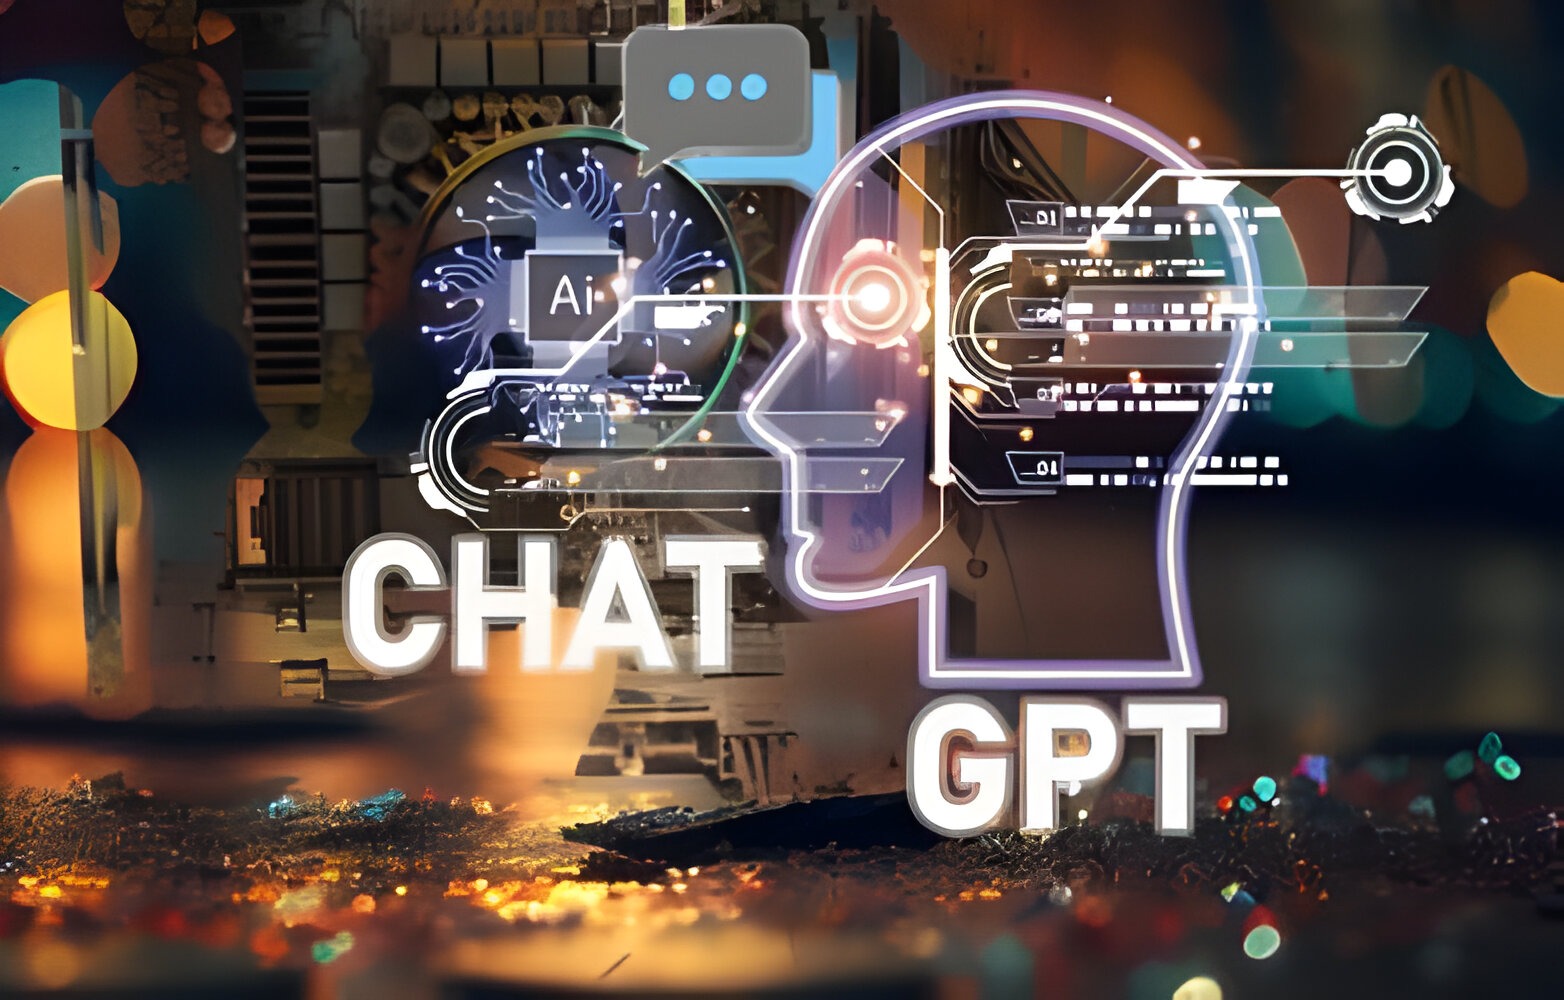 From Chatroom to Cyber Threat: Understanding and Countering Chatbot AI Security Vulnerabilities